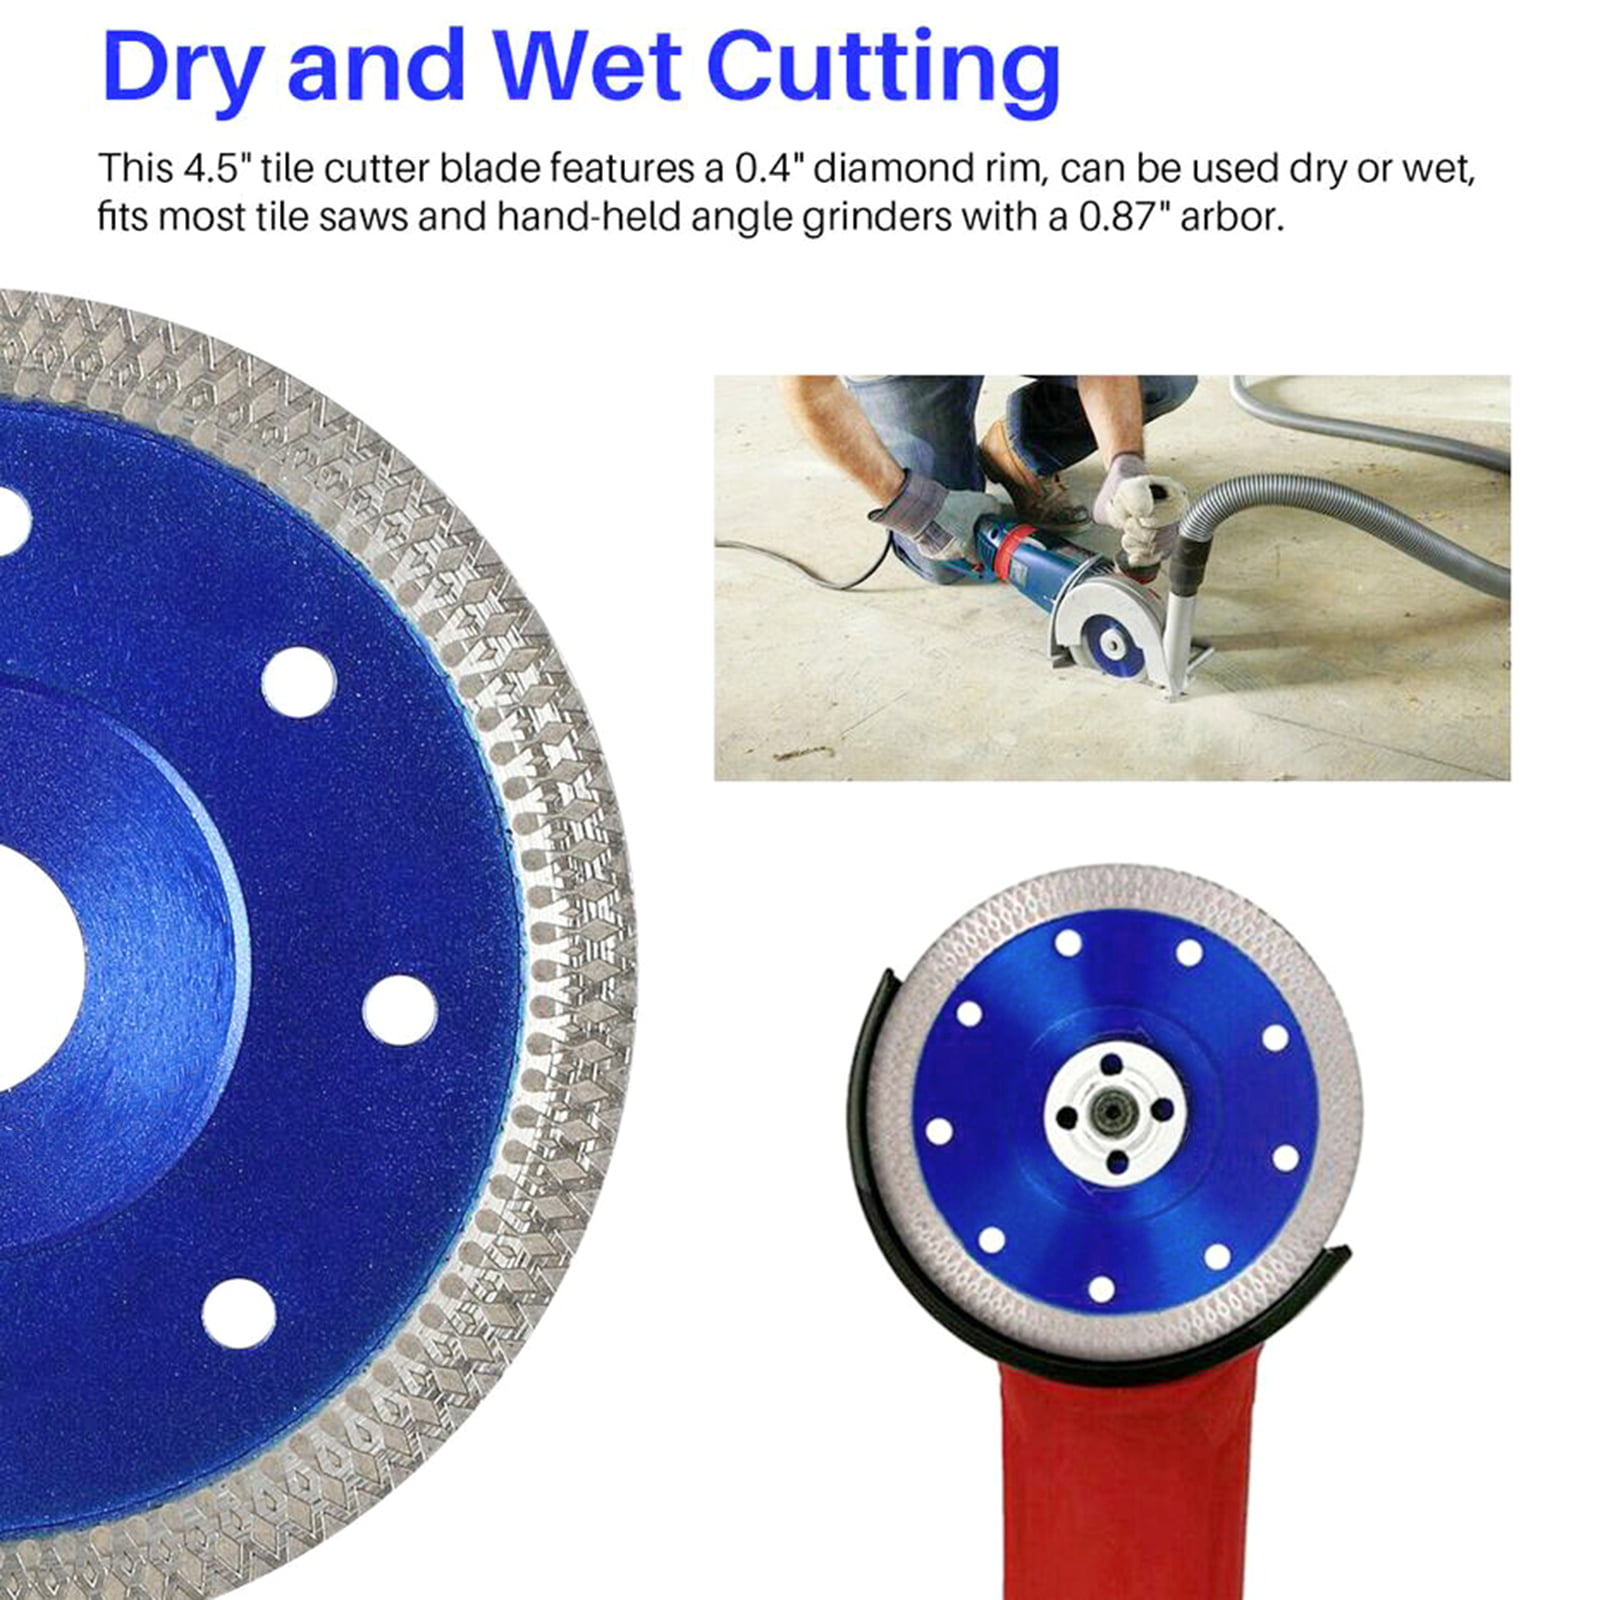 Angle Grinder Diamond Saw Blade Multitool Wood Carving Disc Cutting 4.5 Inch 